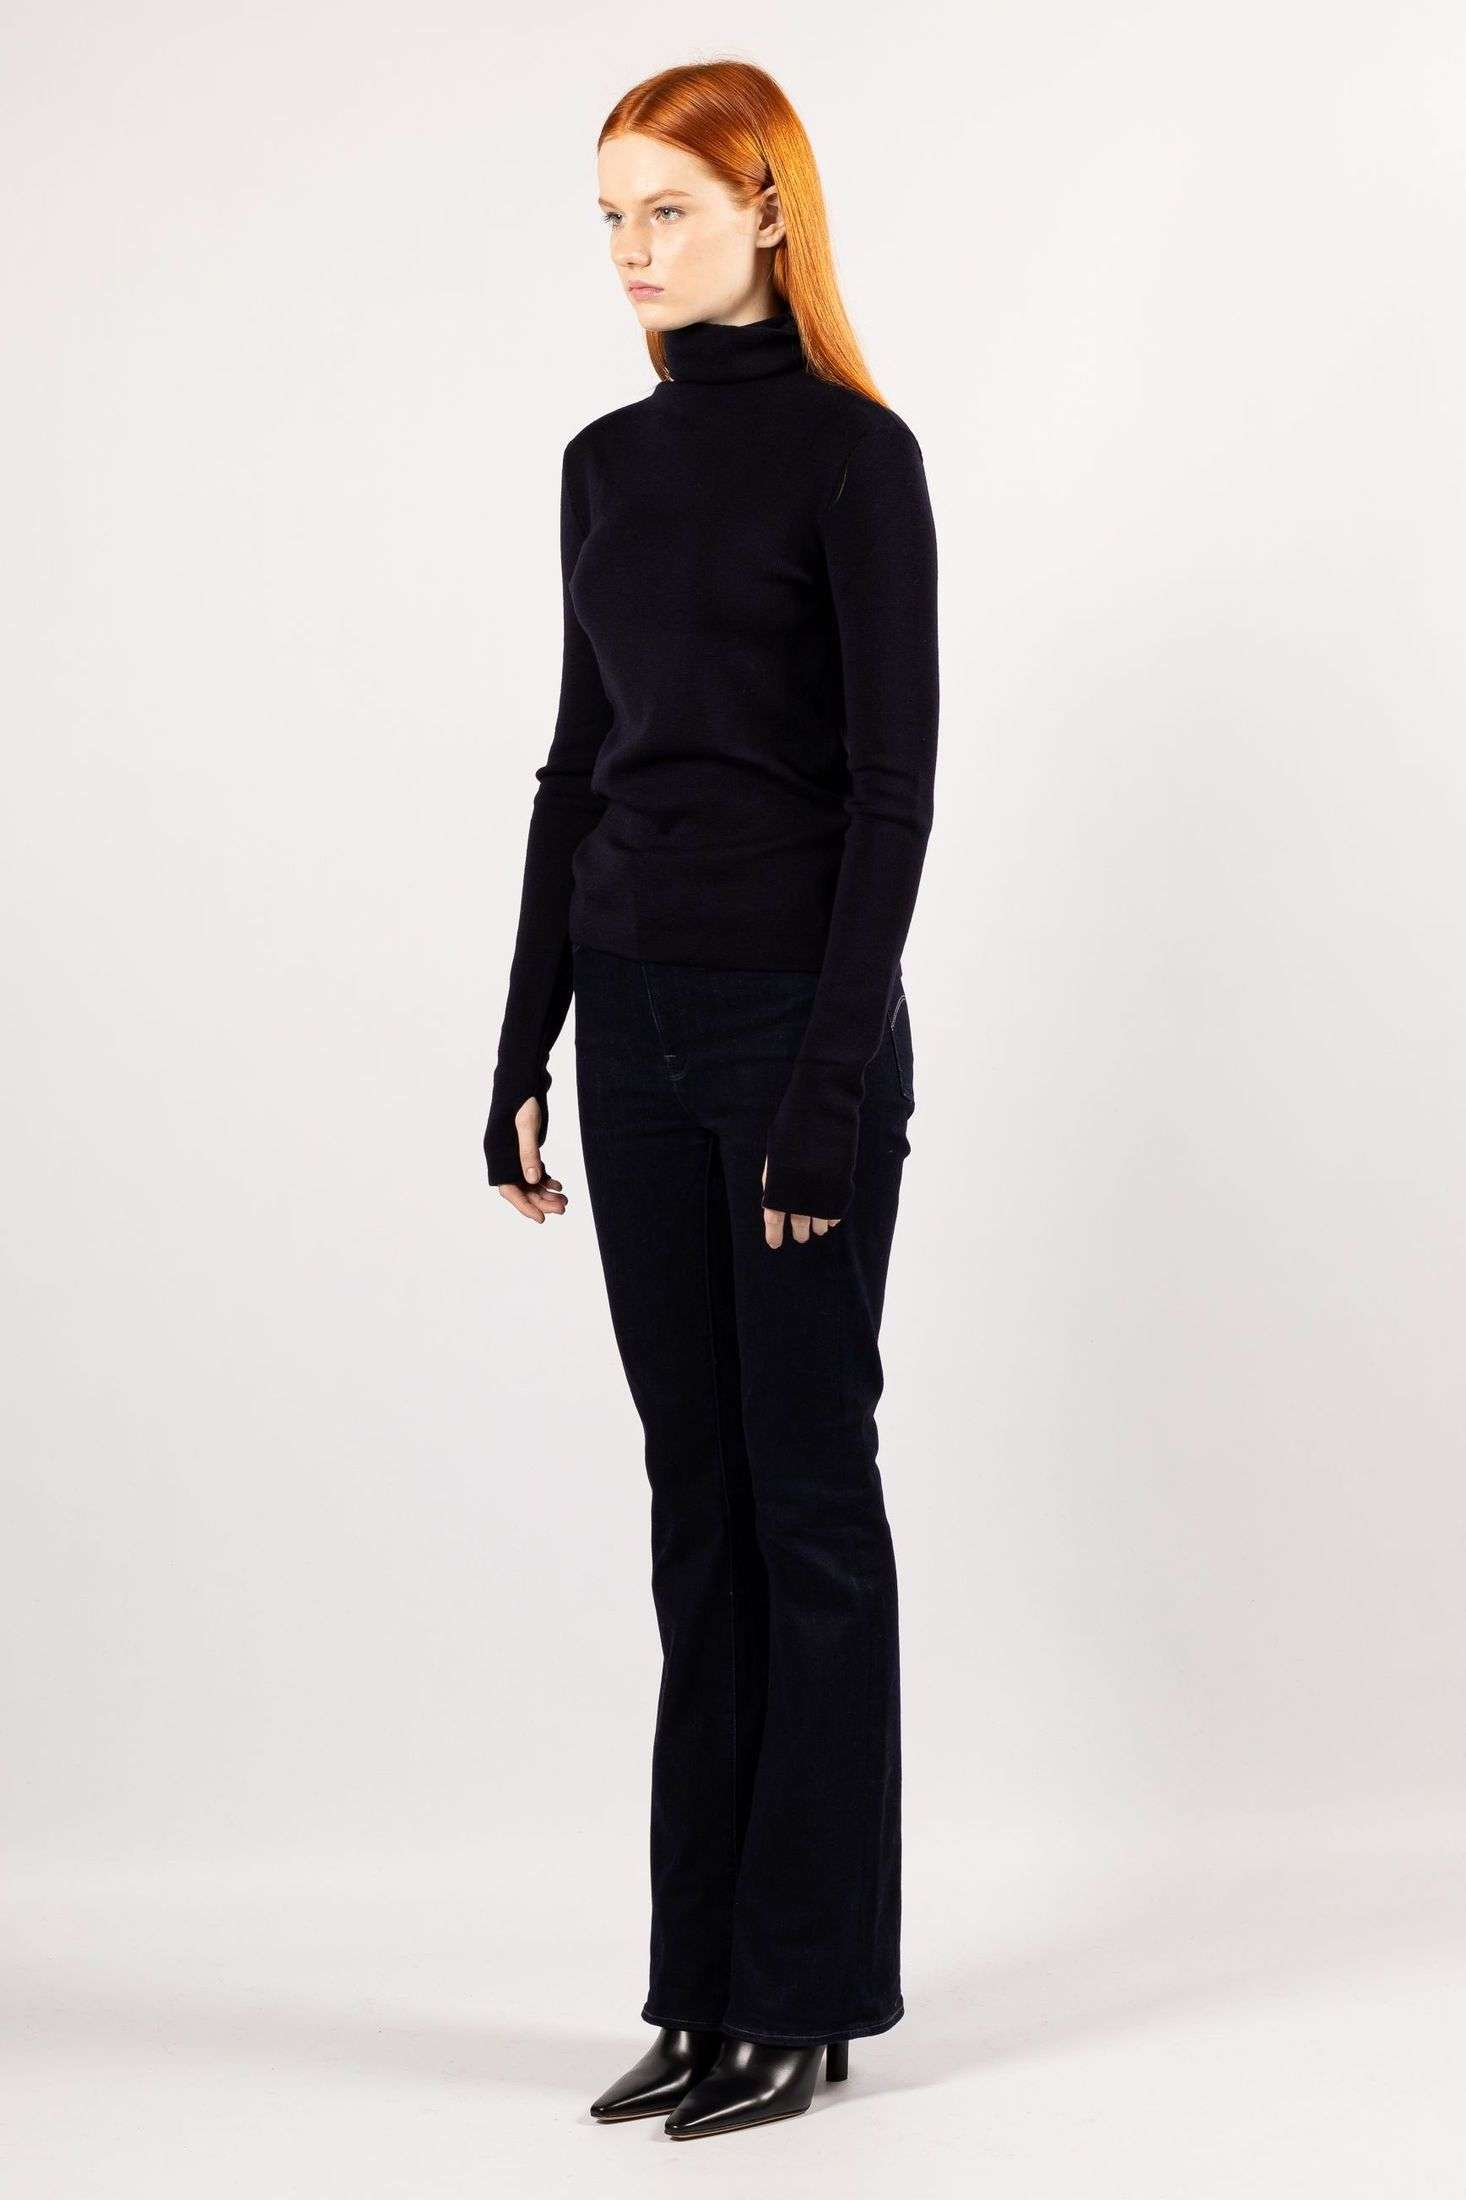 Experience the allure of the navy ADA fine knit turtleneck as modeled by a stylish young woman.